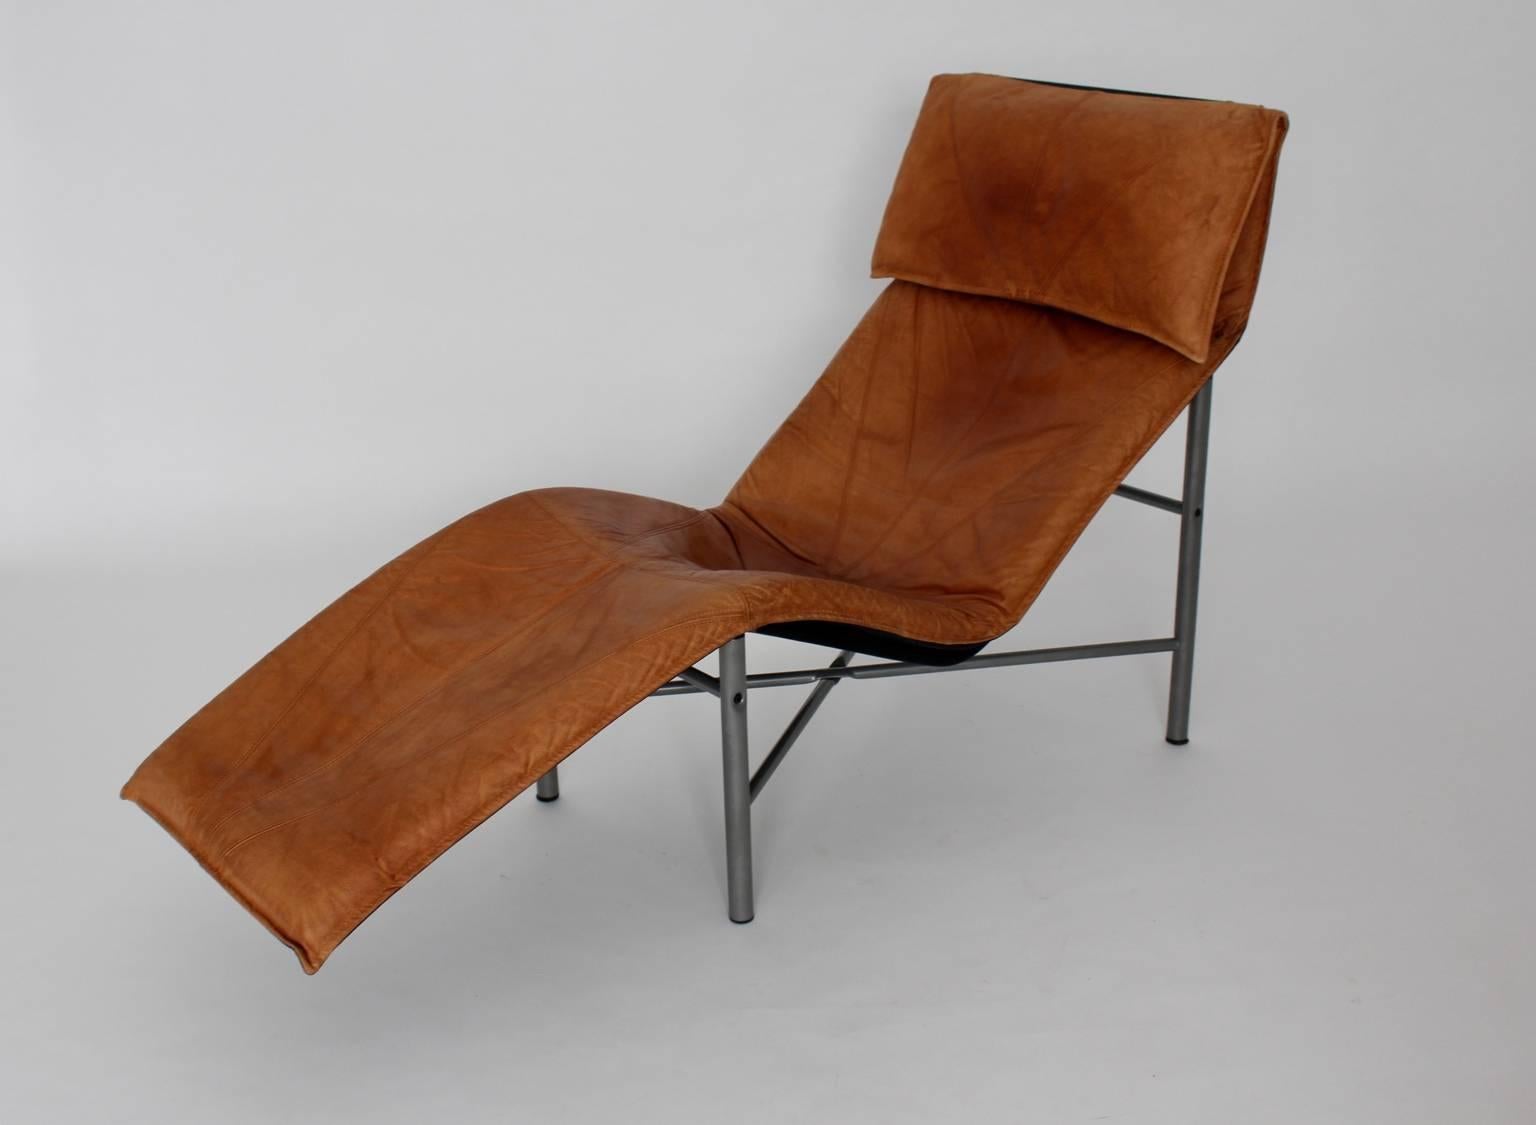 This very comfortable and very stabile chaise longue designed by Tord Bjorklund has a great leather patina.
The tube steel base is grey lacquered and the cognac leather upholstery lies on and is removable.